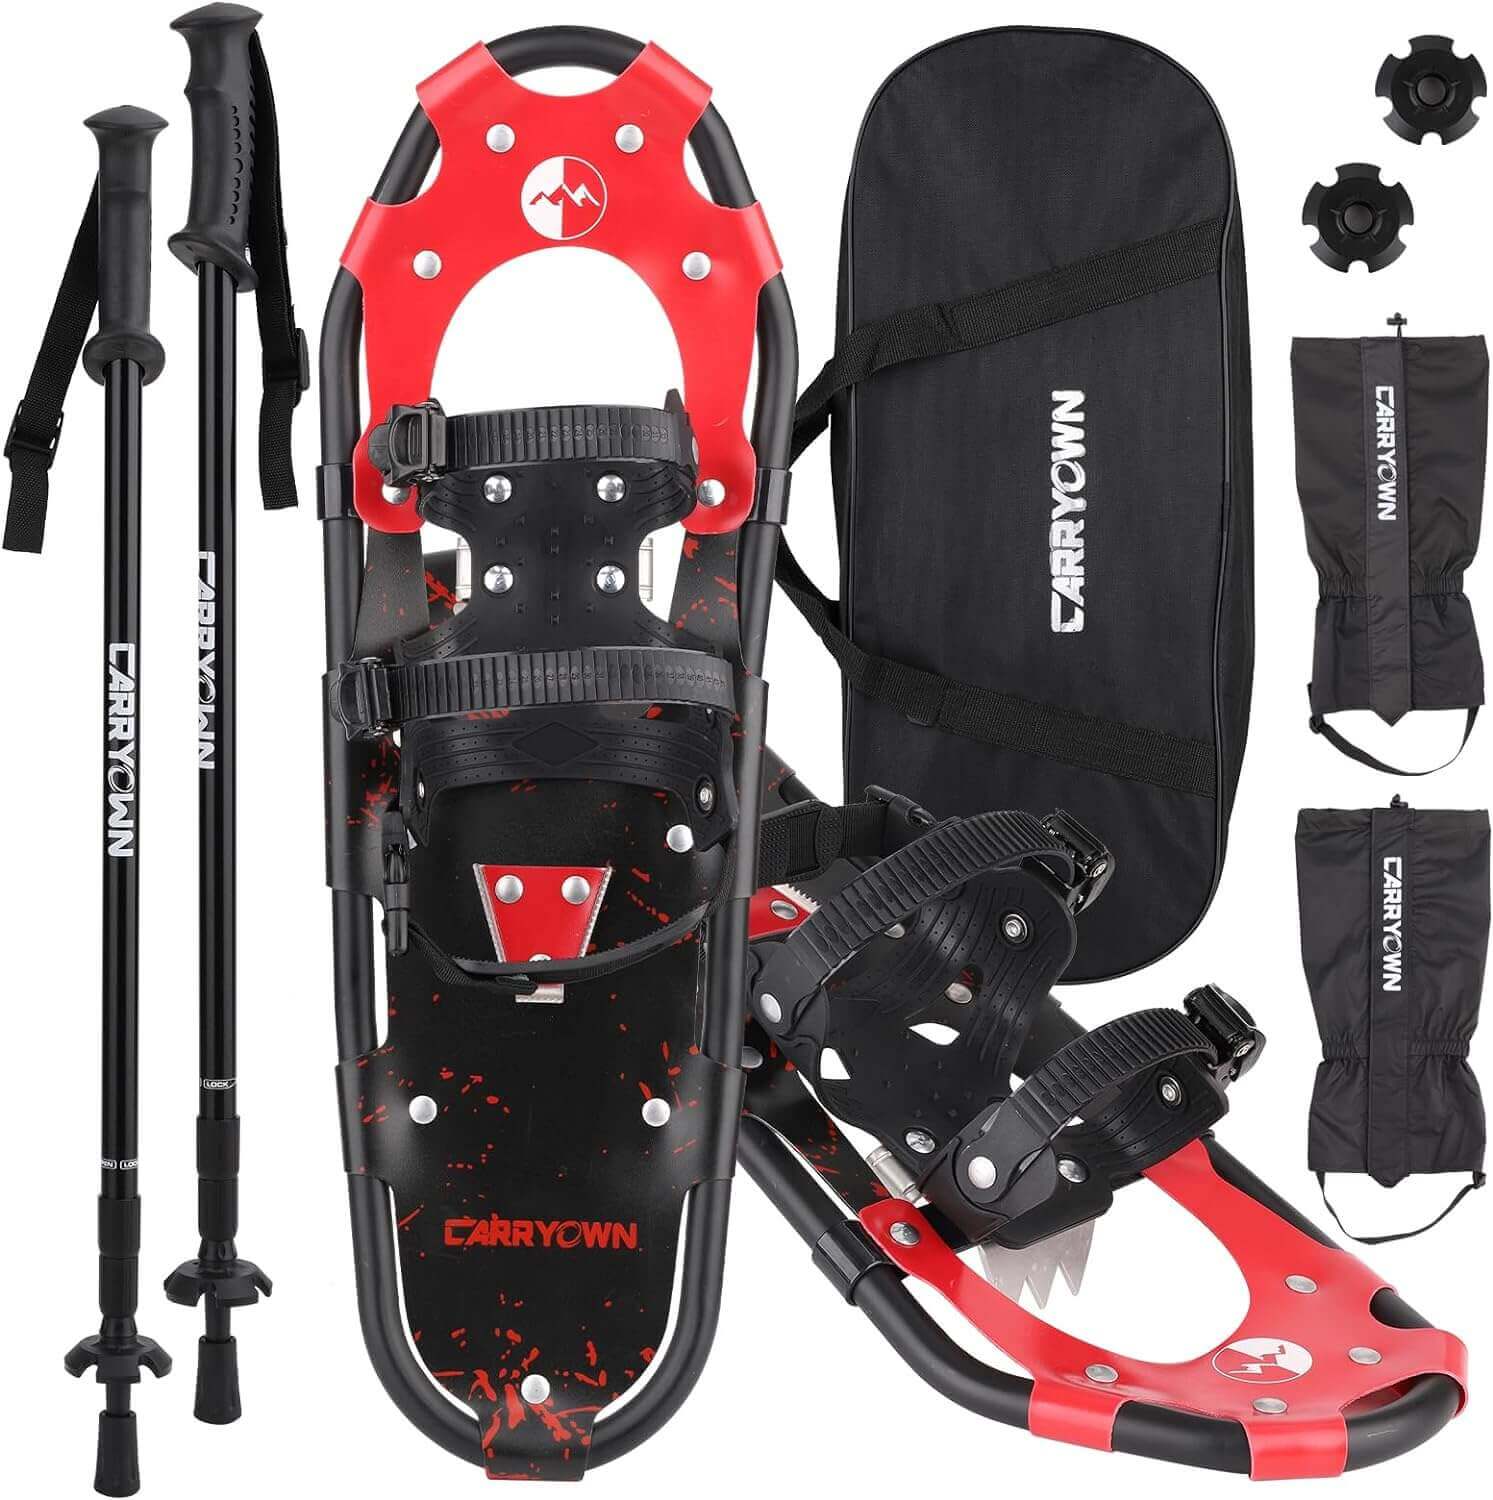 Shop The Latest >3 in 1 Light Weight Snowshoes Set with Trekking Poles > *Only $128.24*> From The Top Brand > *‎Carryownl* > Shop Now and Get Free Shipping On Orders Over $45.00 >*Shop Earth Foot*